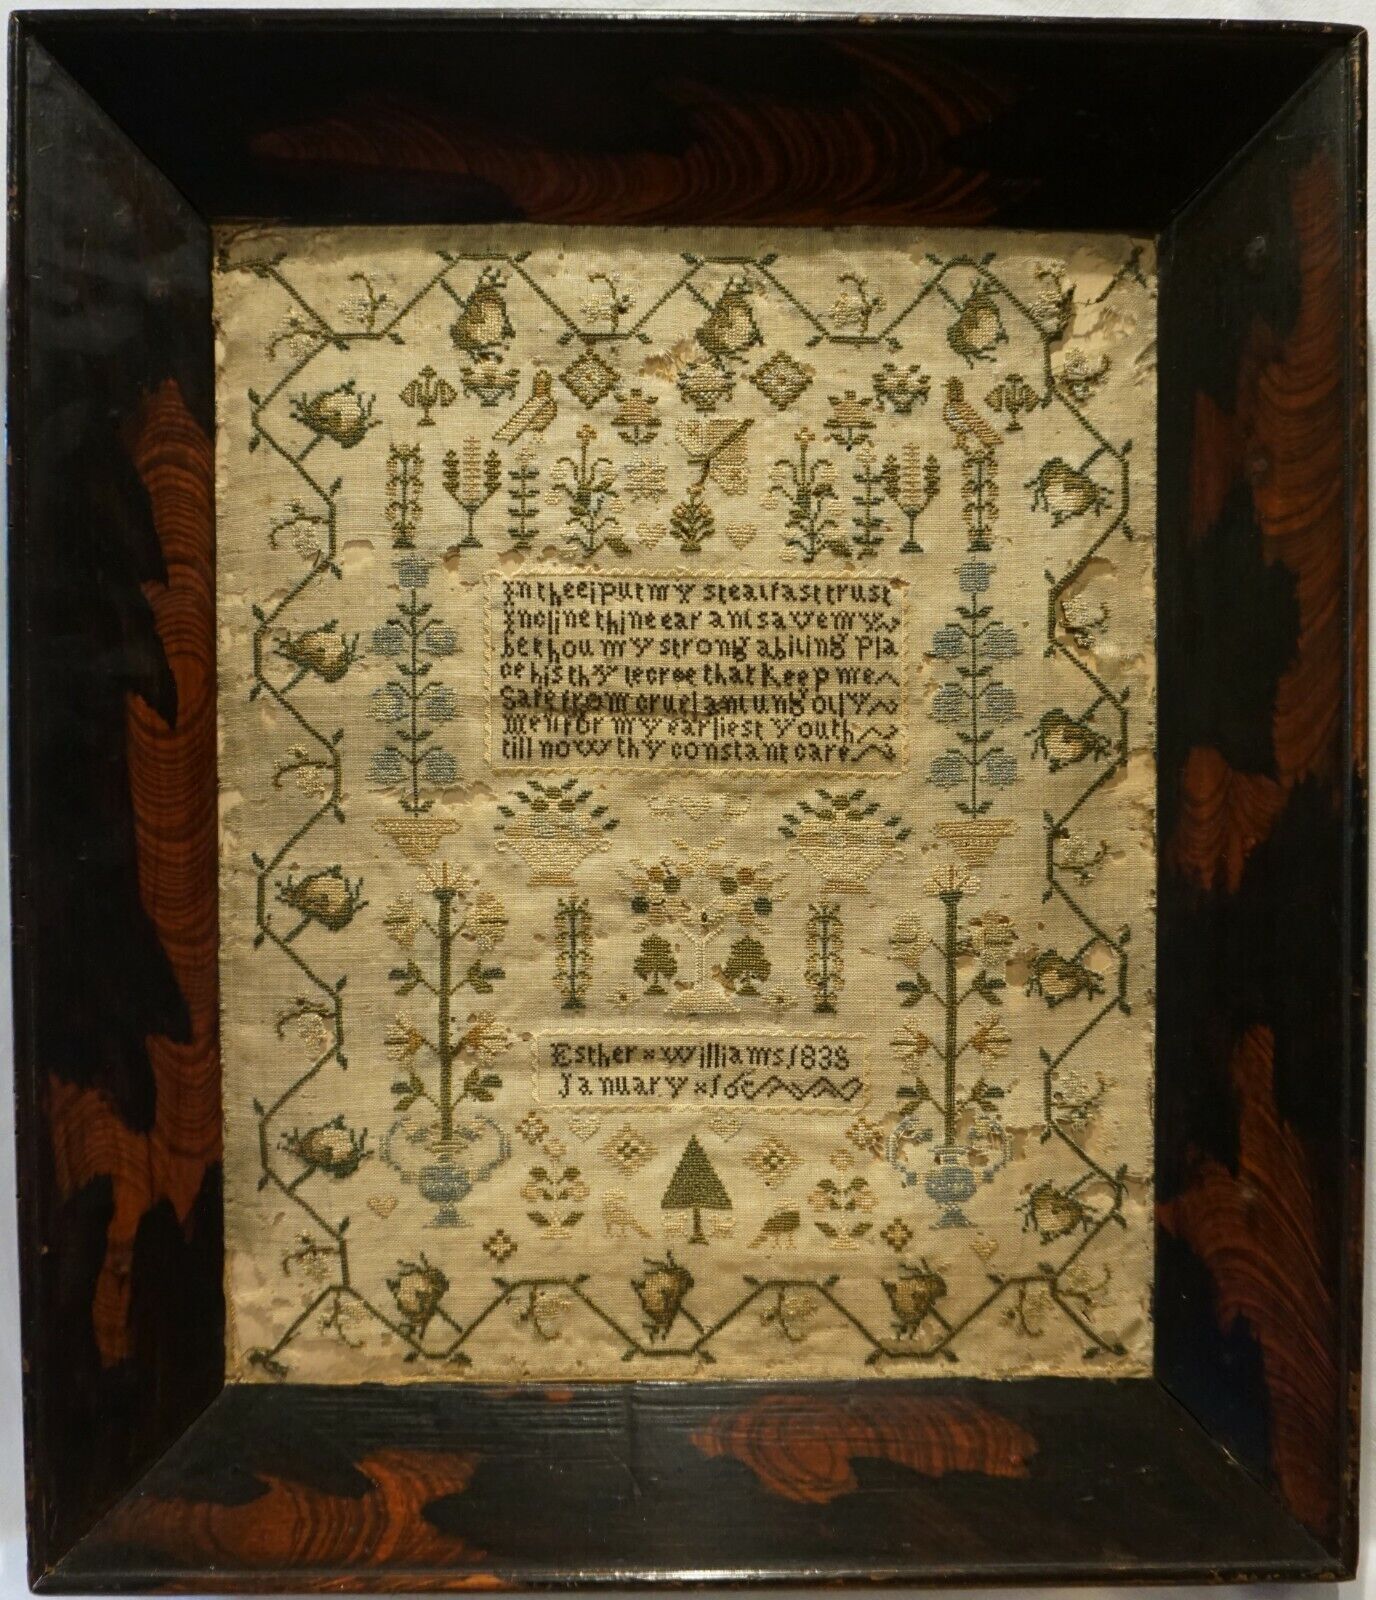 EARLY 19TH CENTURY MOTIF & VERSE SAMPLER BY ESTHER WILLIAMS - January 16th 1835